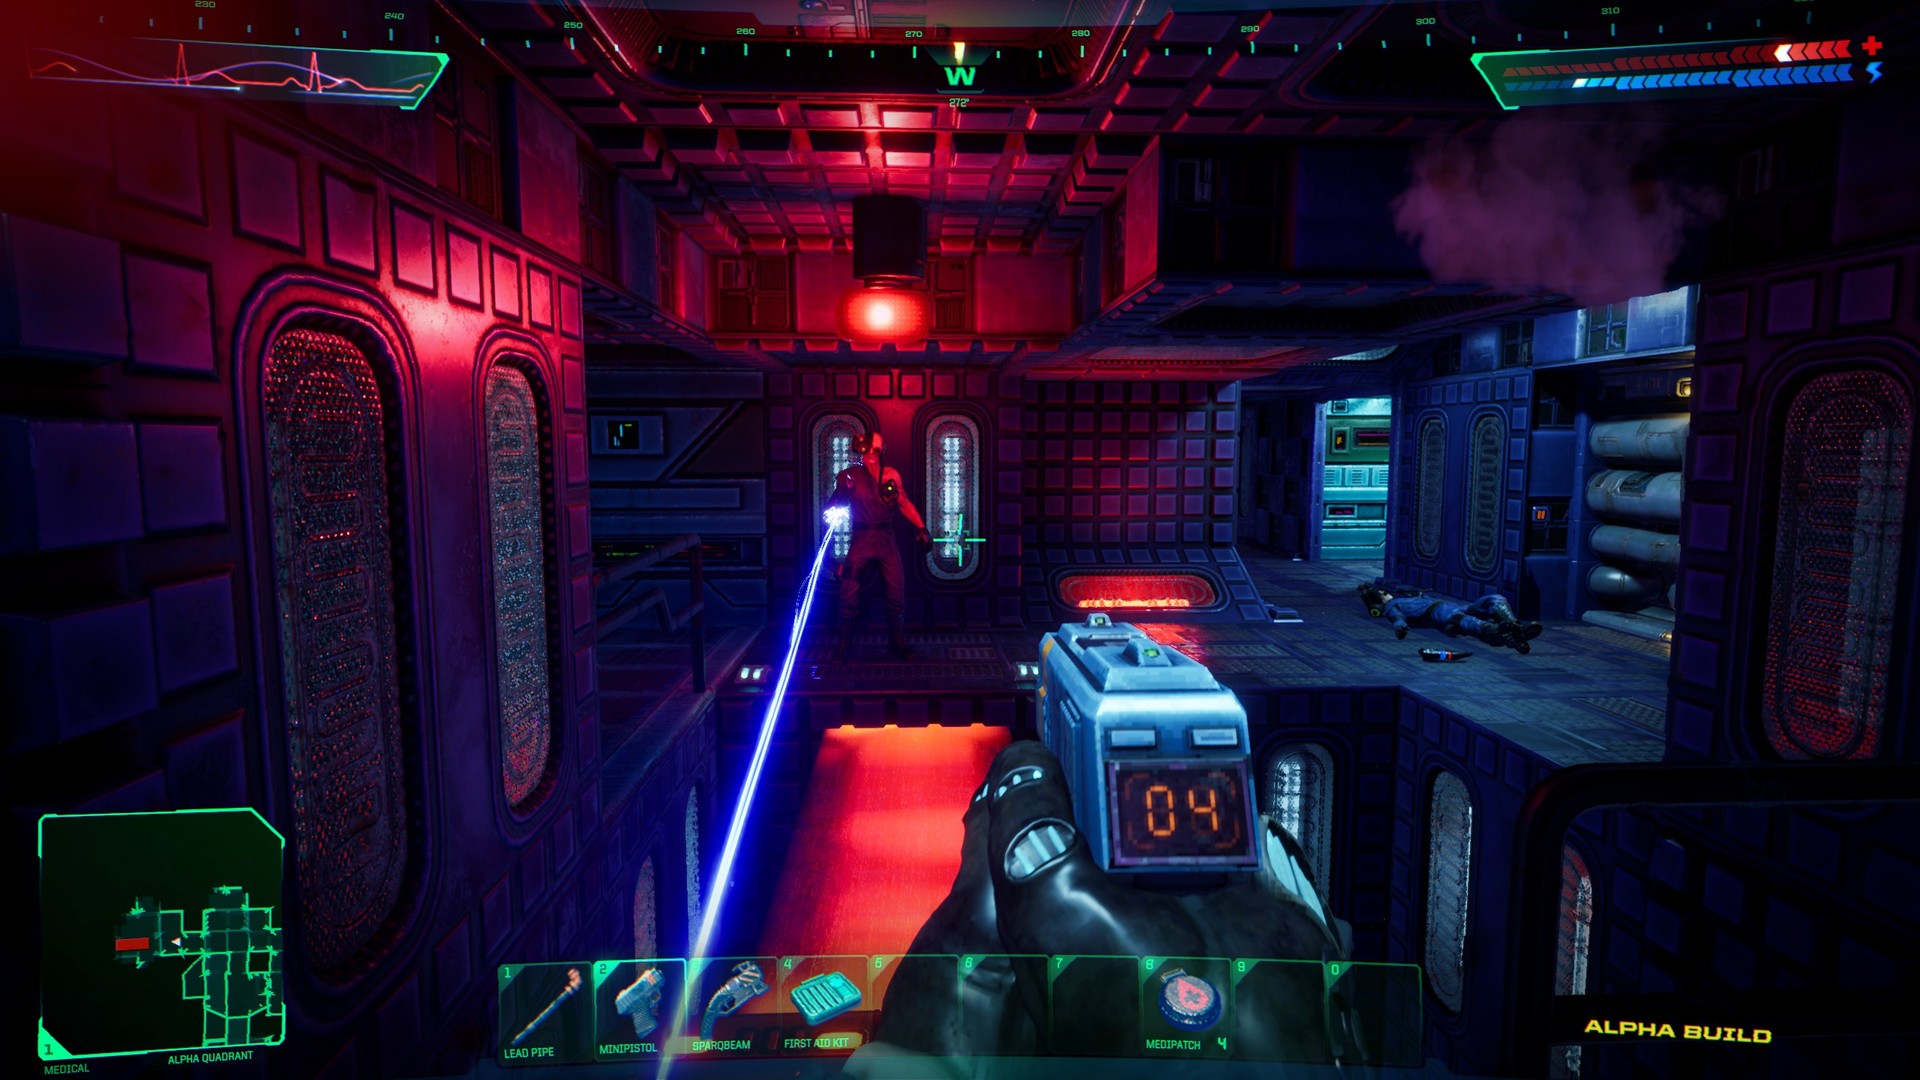 system shock ps4